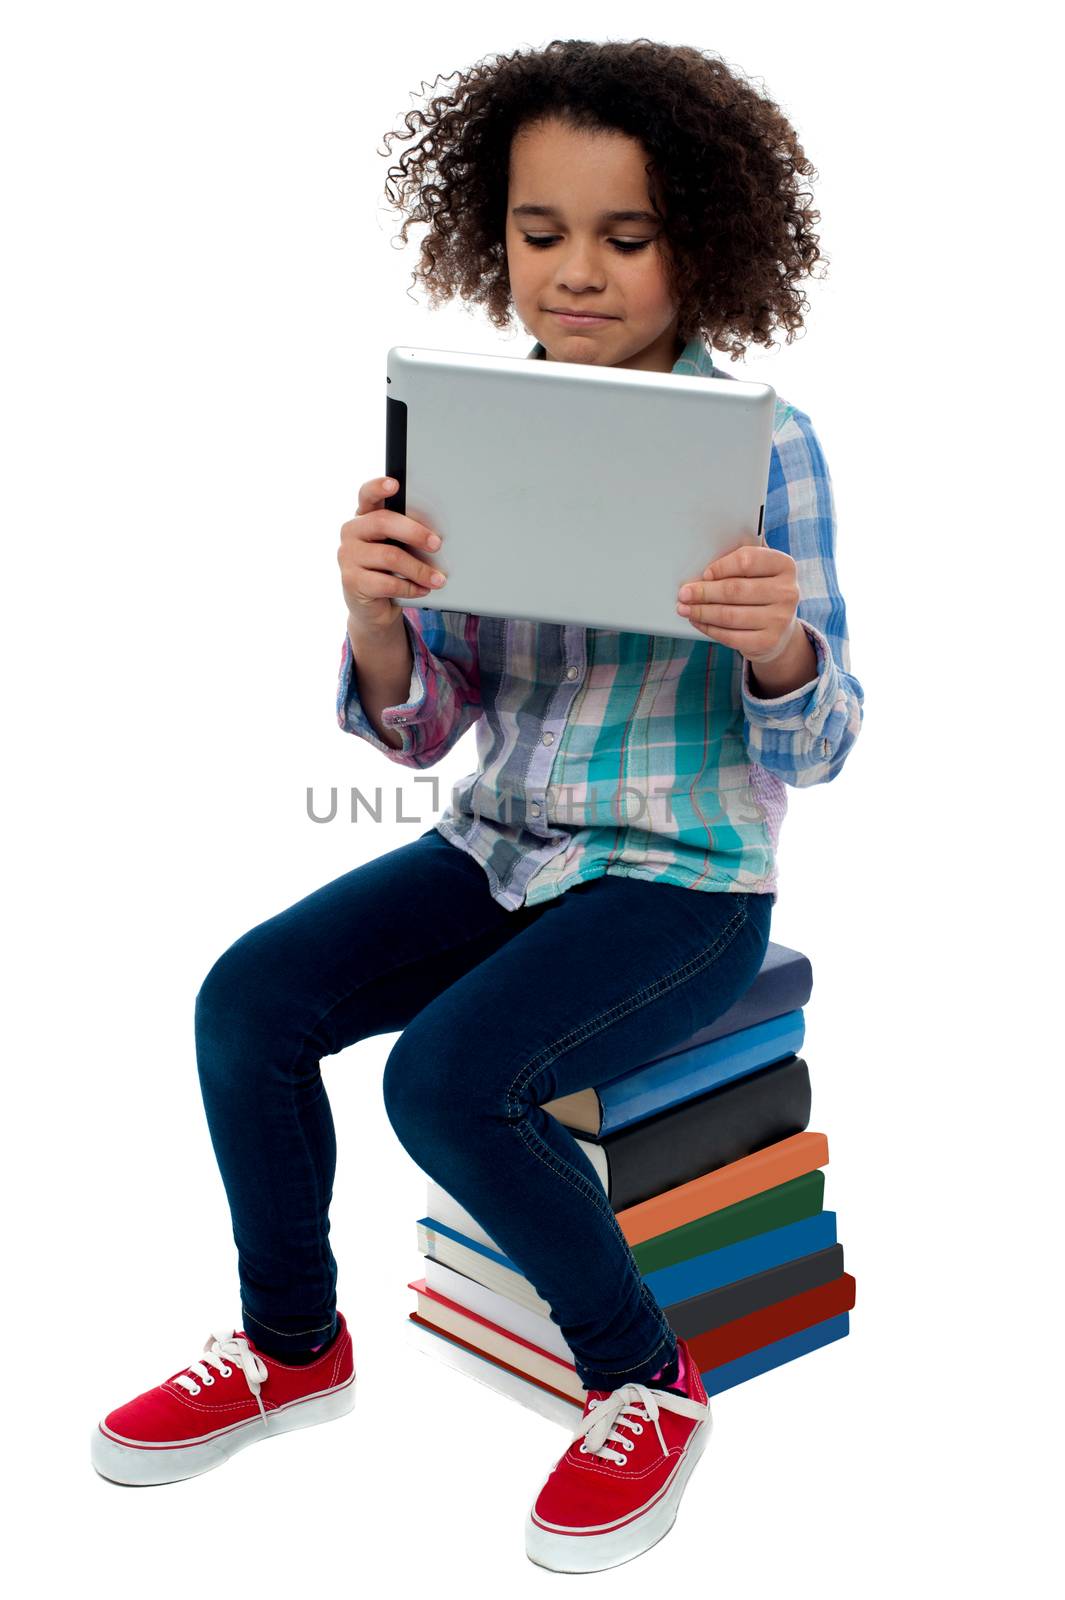 Little girl sitting on books with digital tablet